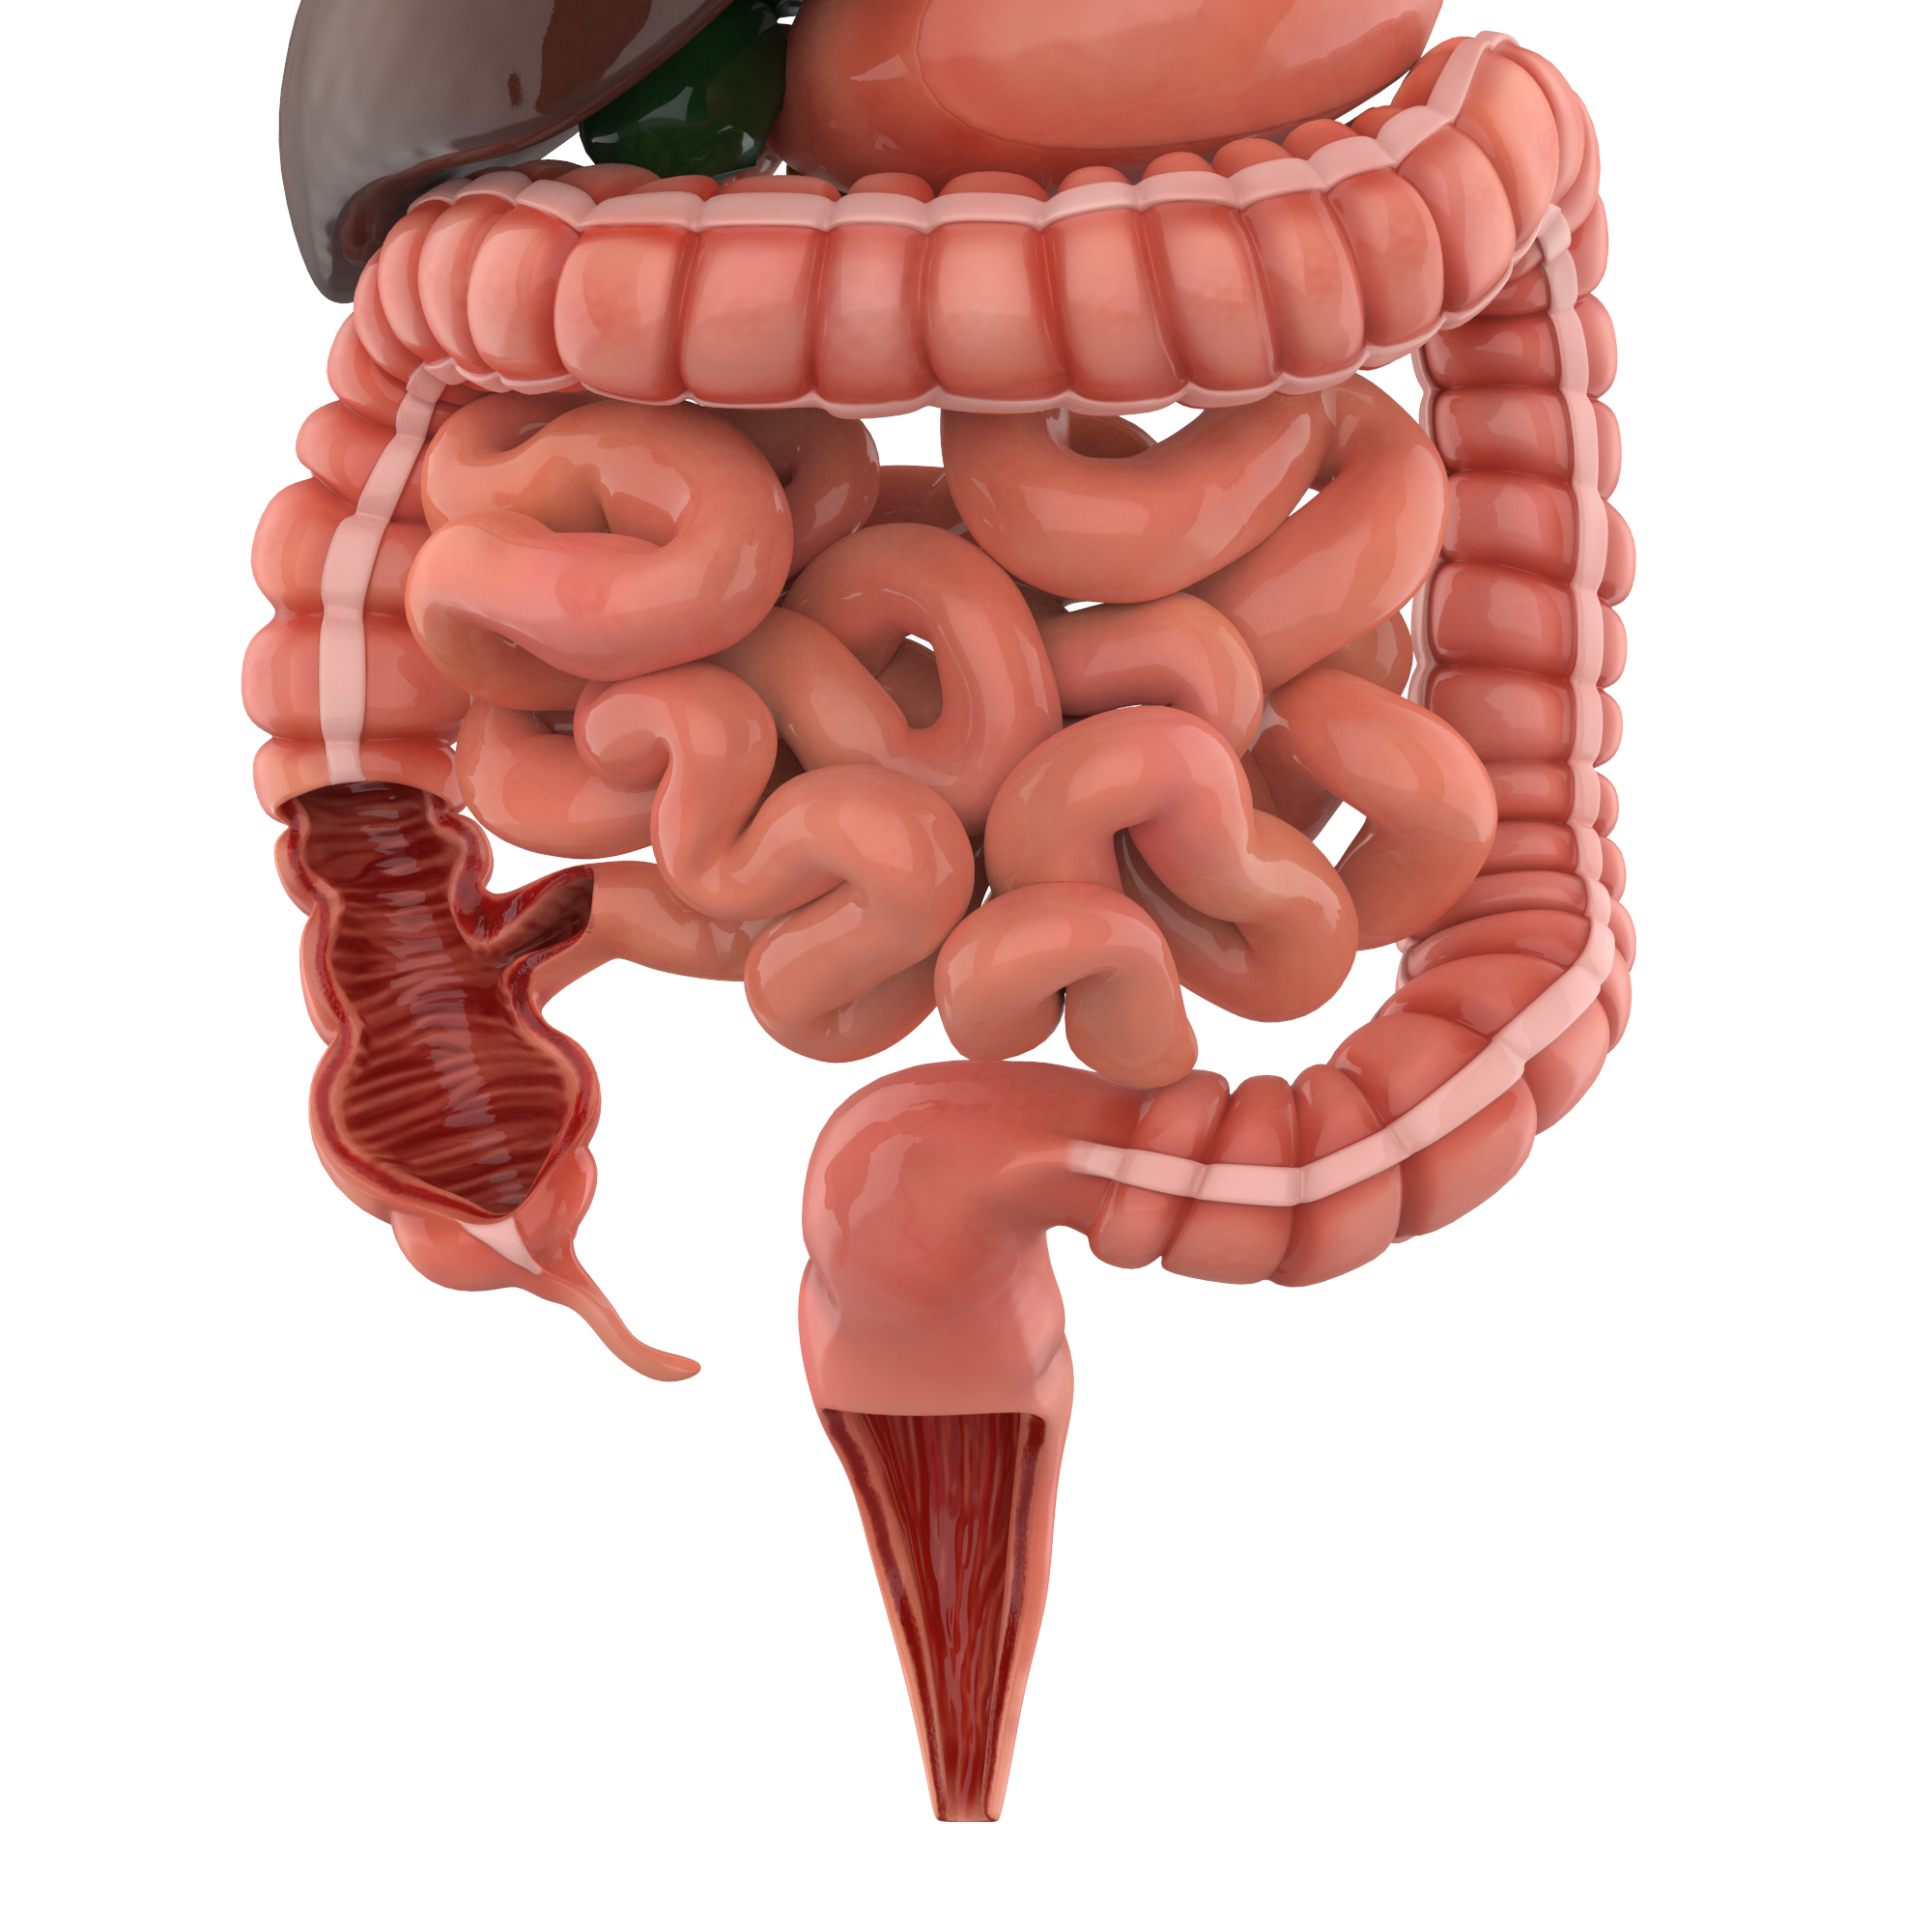 digestive-system-3d-model-project-tenormoms